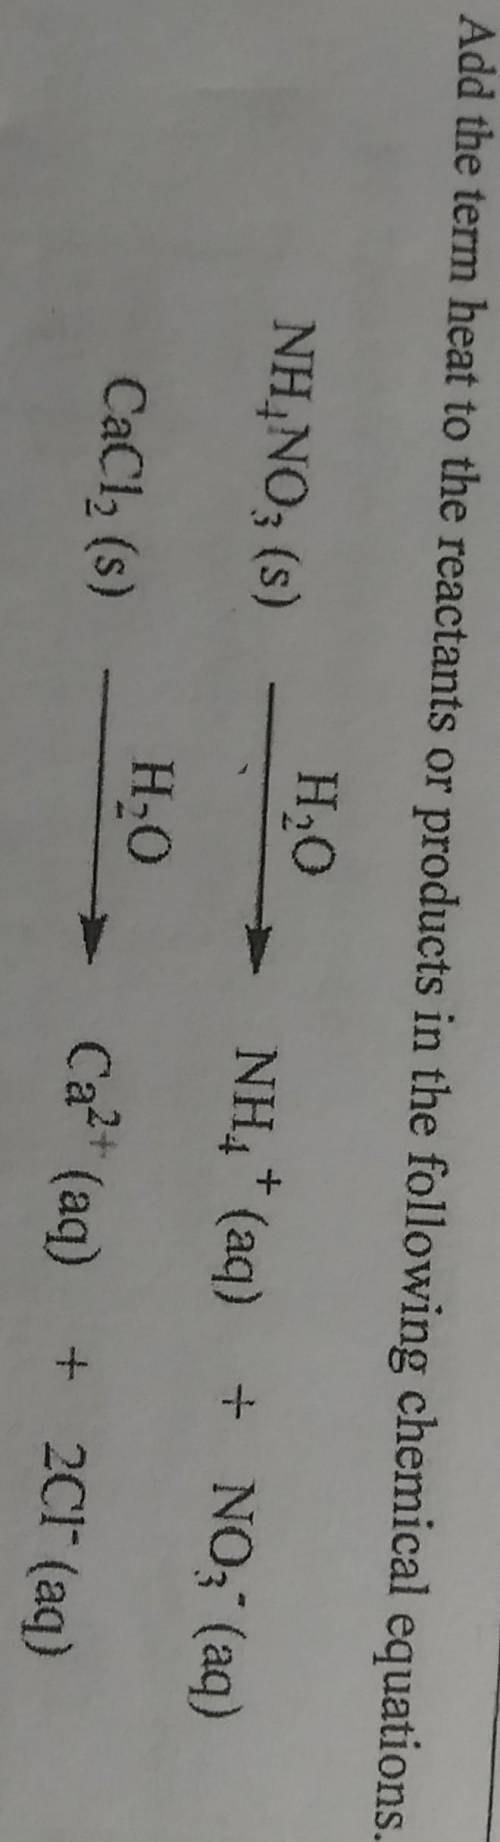 Add the term heat to the reactants or products in the following chemical equation